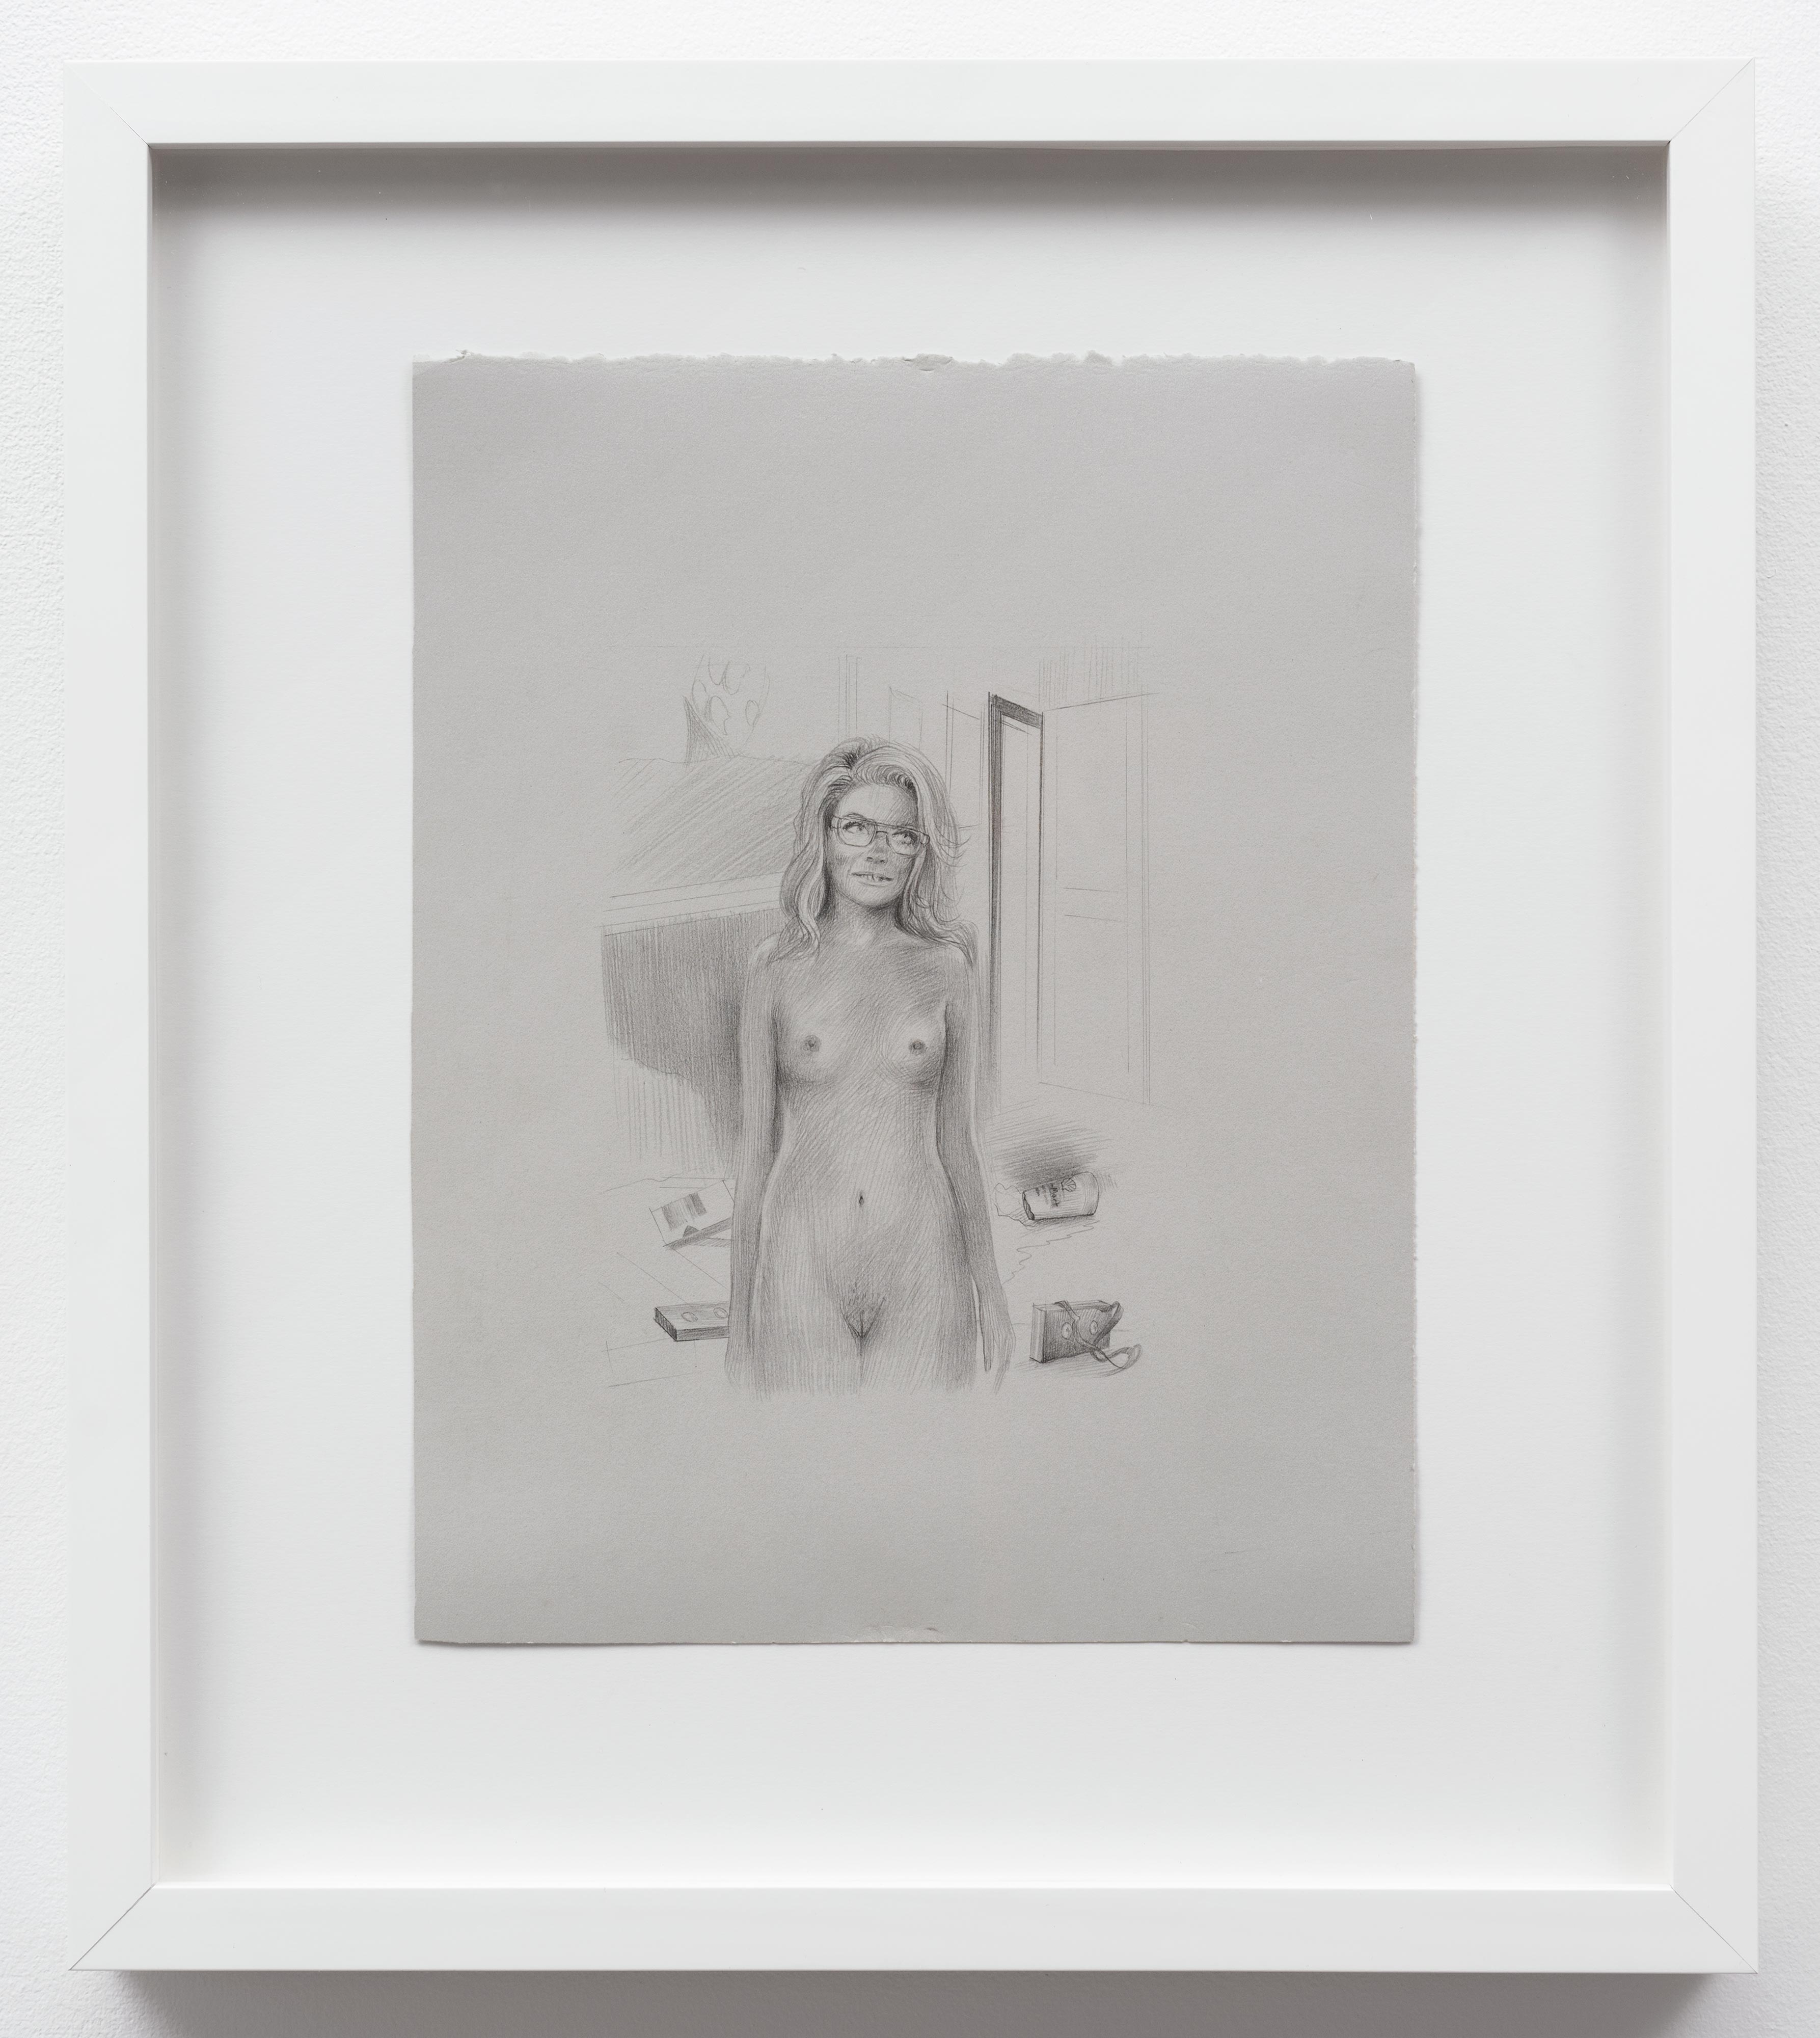 Brandi Twilley<br>Naked in the Living Room with Glasses<br>2014<br>Graphite on gray paper<br>9 x 11.5 in (23 x 29 cm)